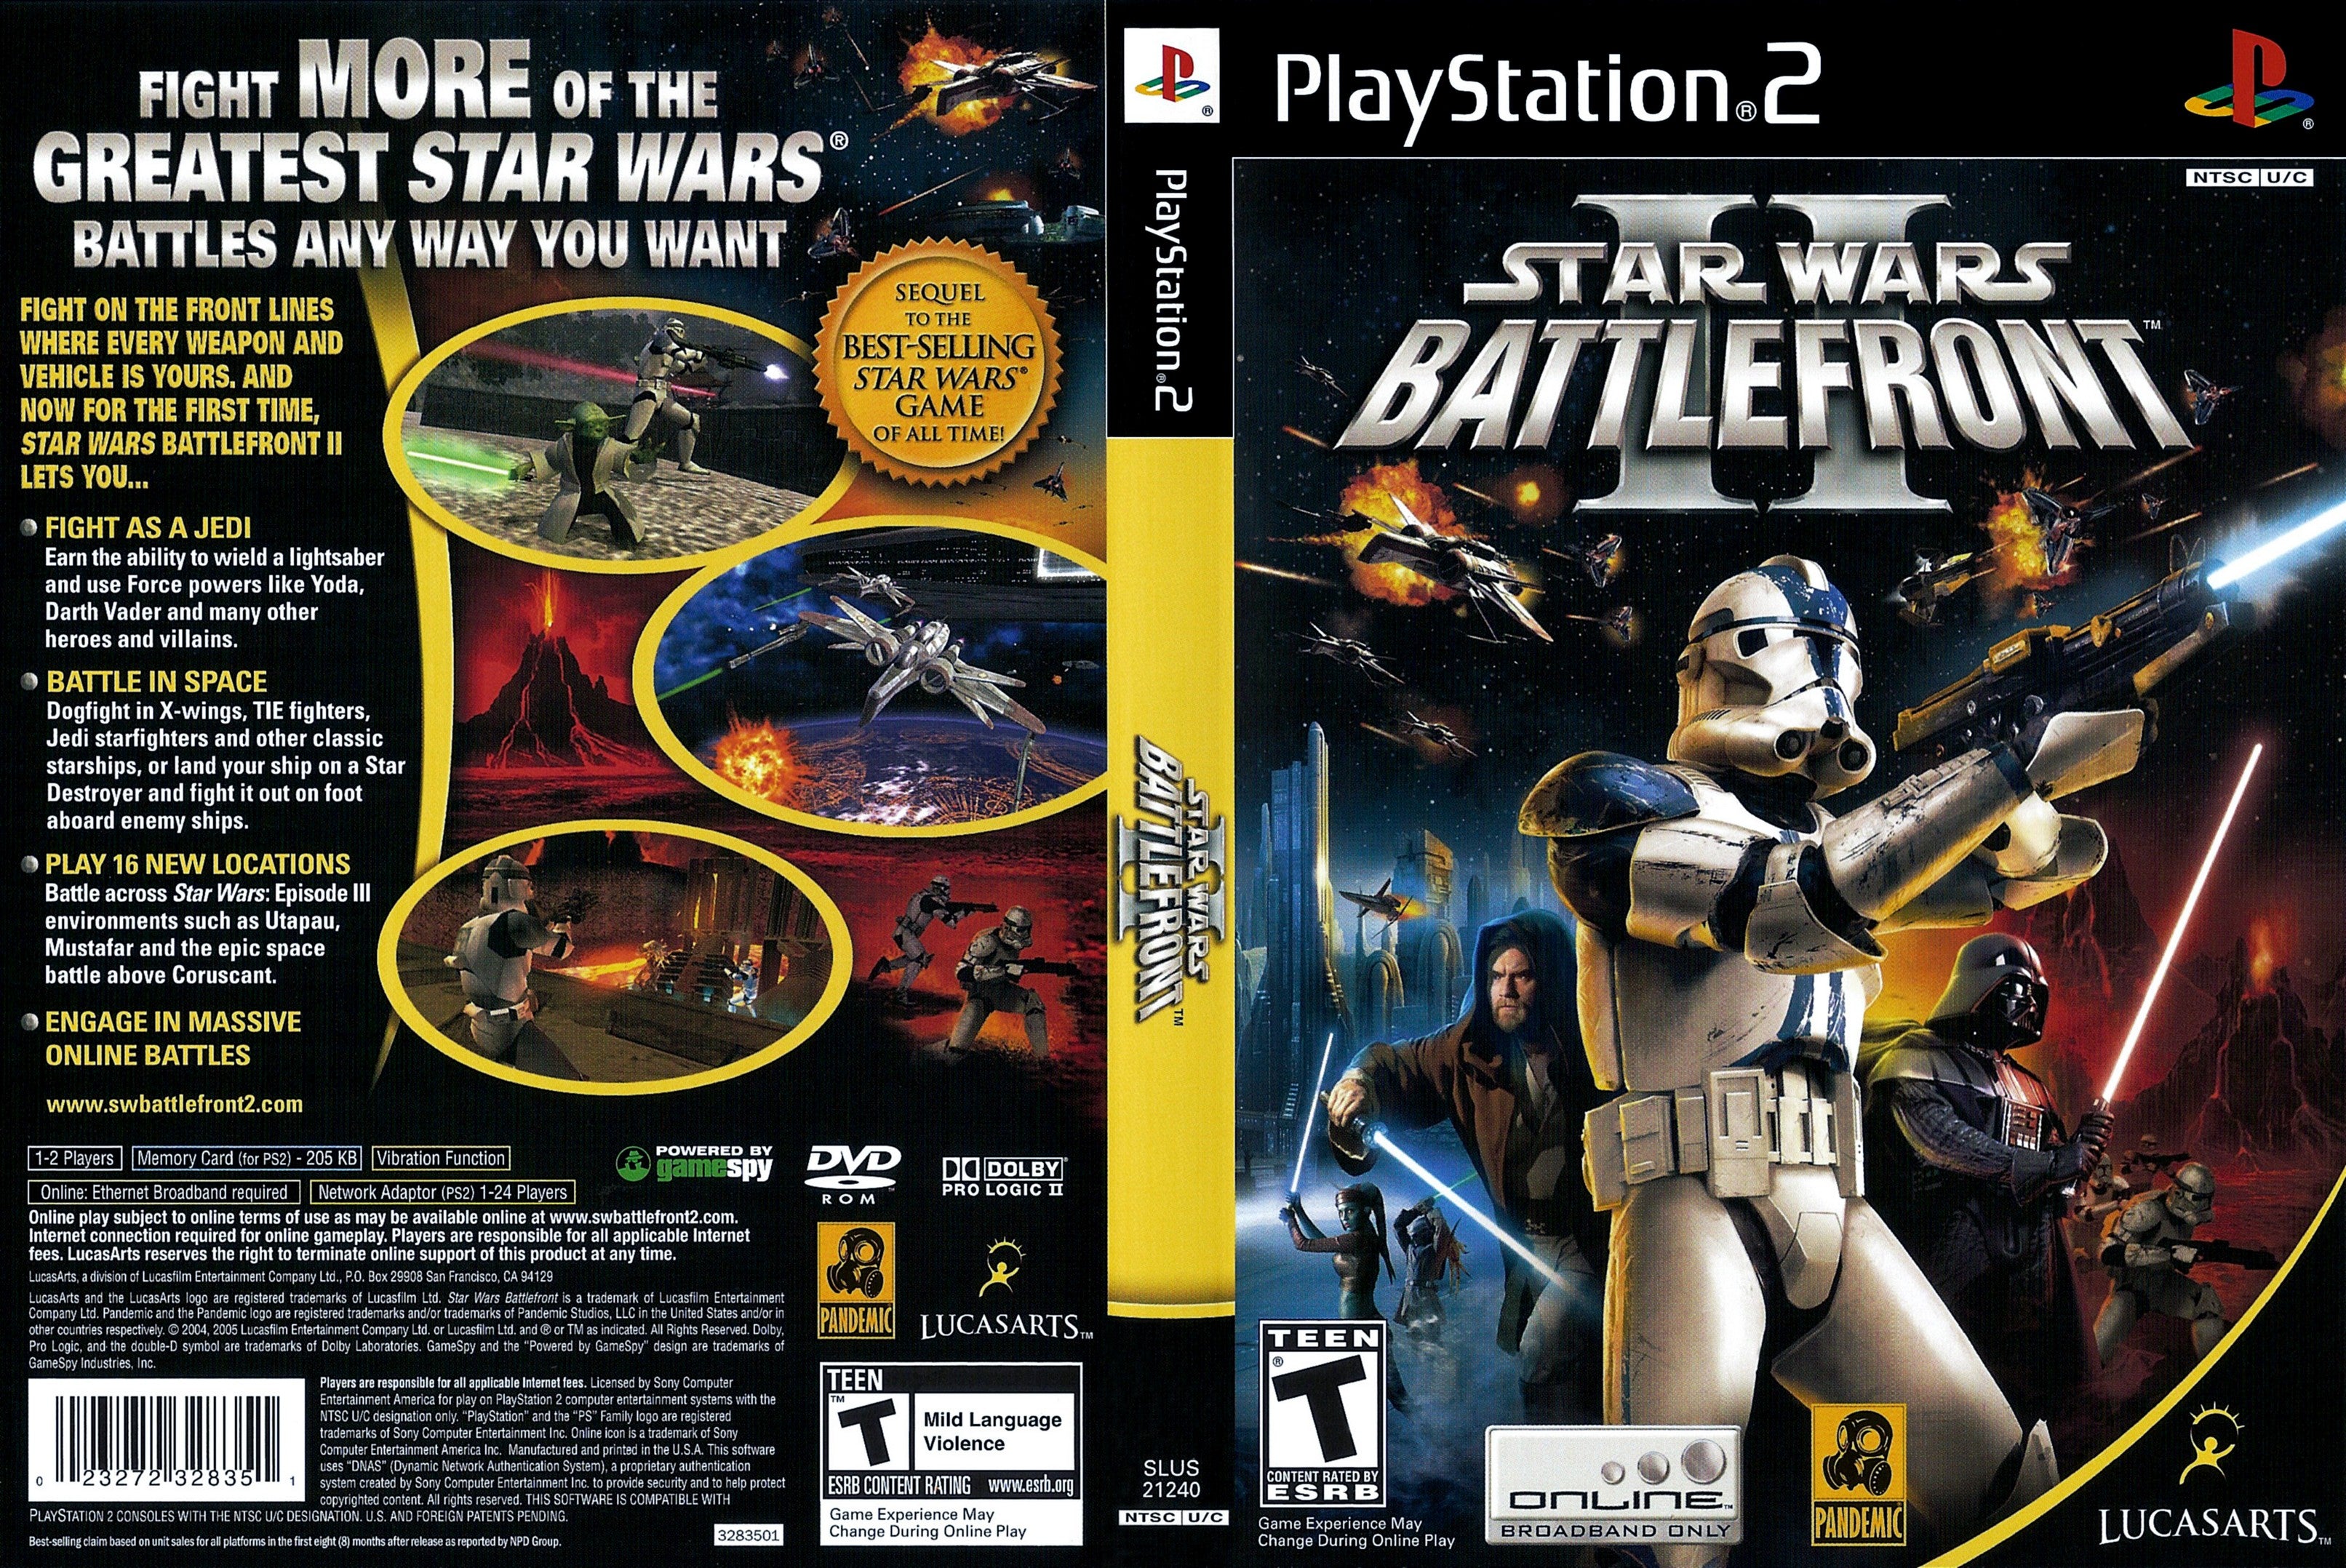 This is Star Wars Battlefront II 